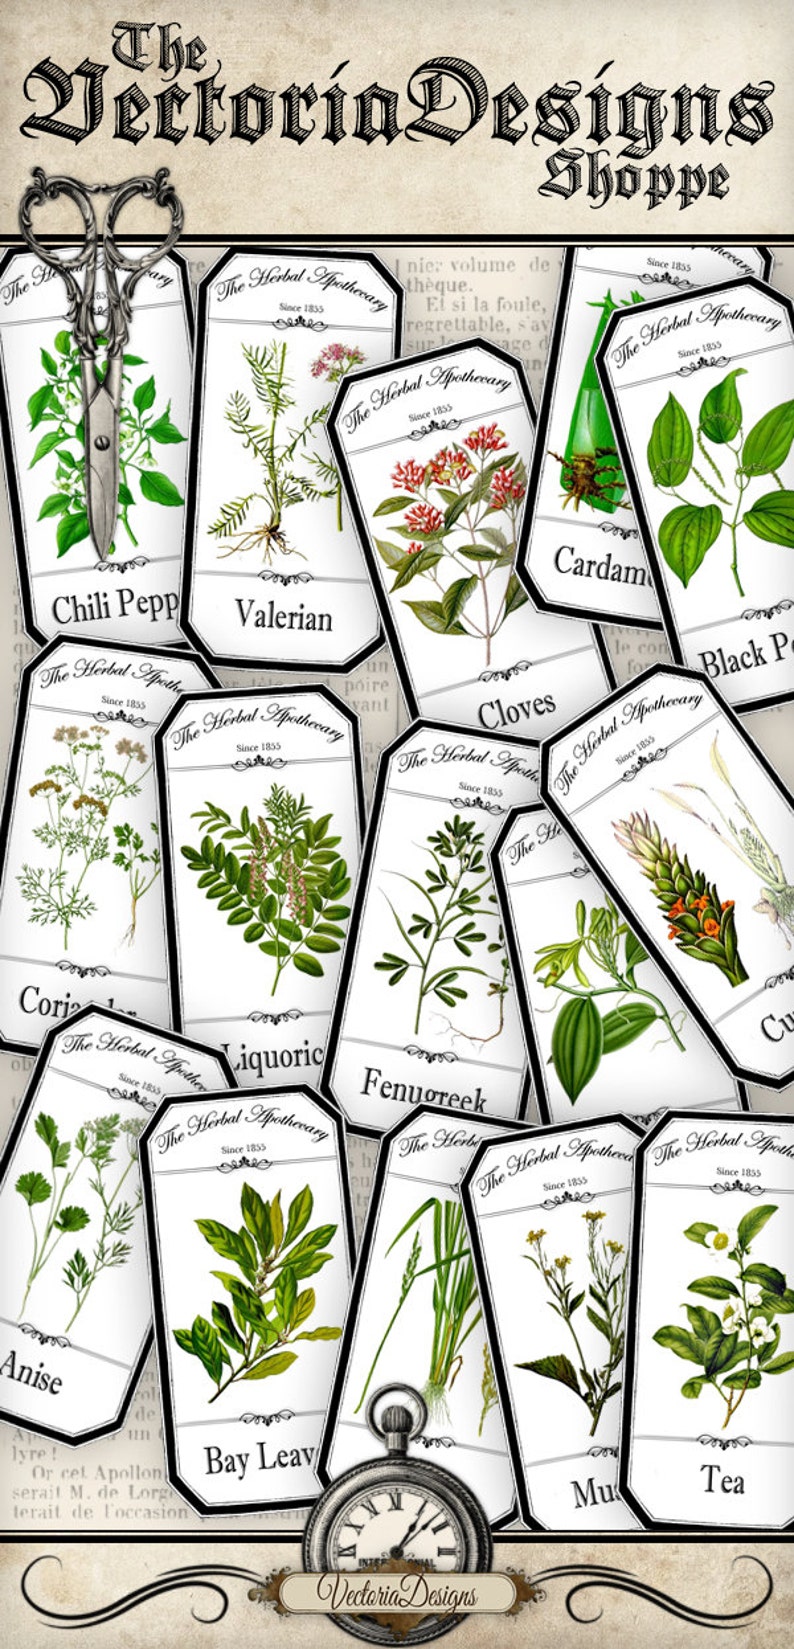 Herbal Apothecary Labels printable save ink paper craft art hobby crafting scrapbooking instant download digital collage sheet 000912 image 2